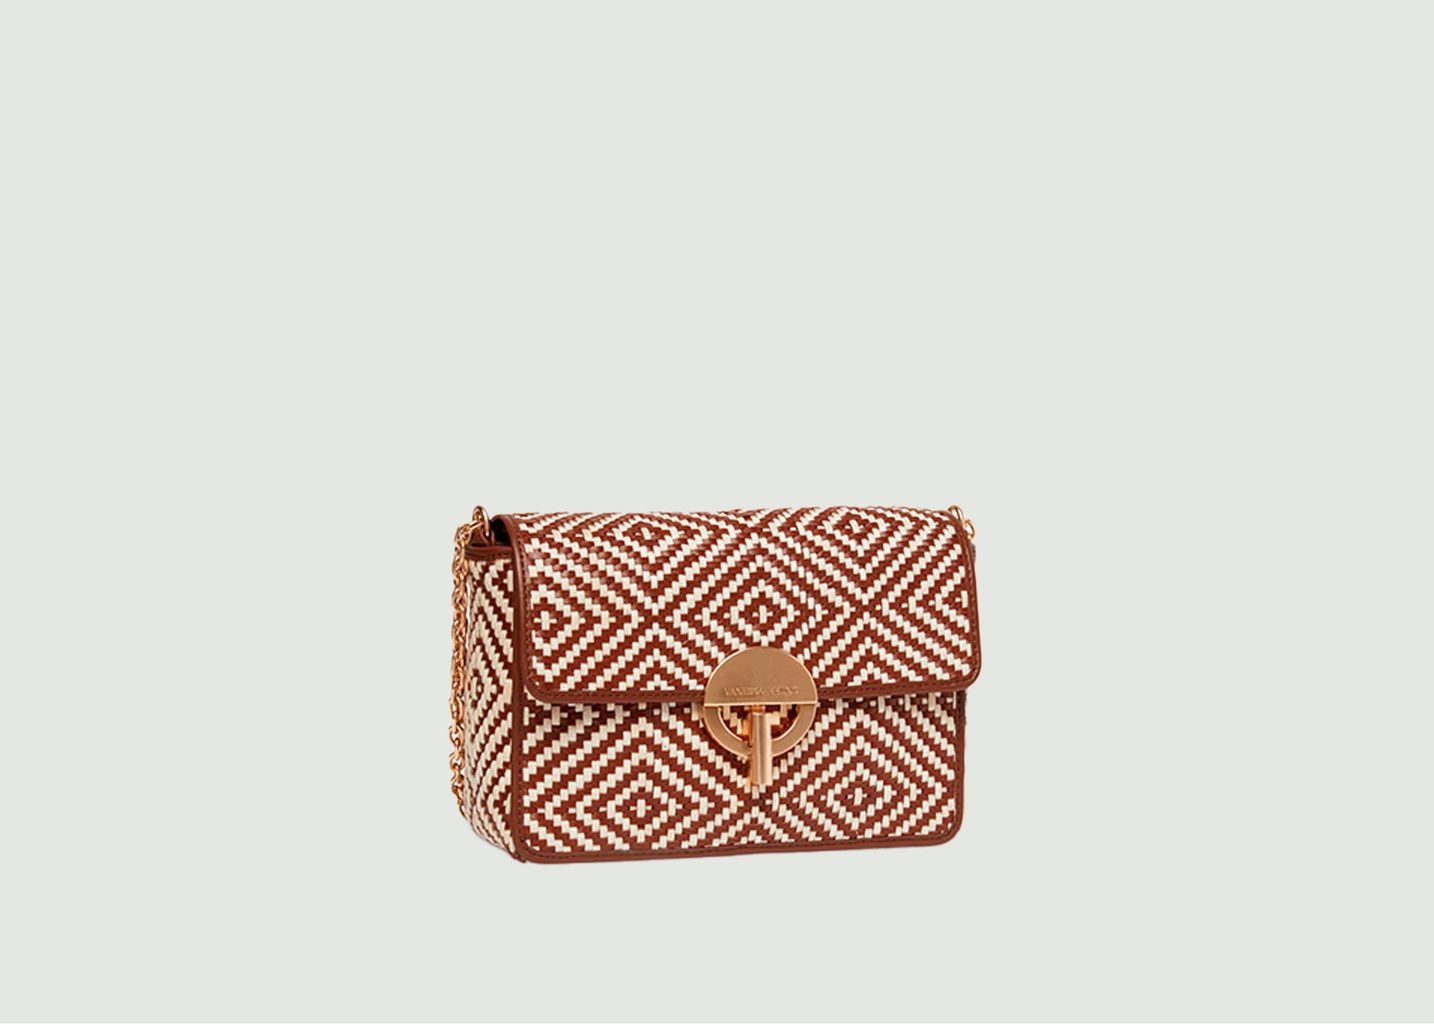 Small bag in leather and woven cotton with Moon geometric pattern - Vanessa Bruno